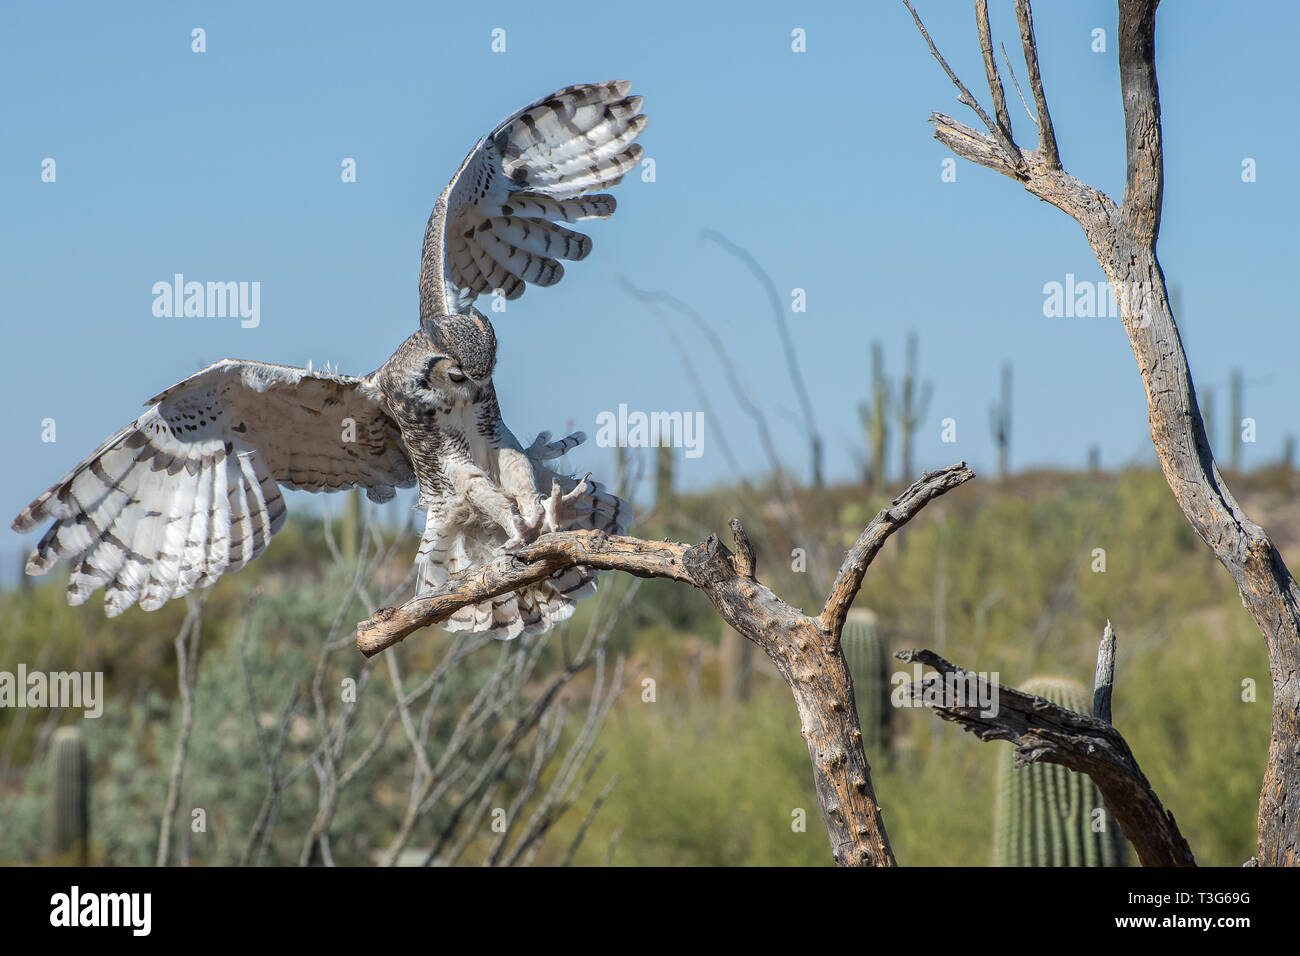 Great Horned Owl coming in for a Landing with Outstretched Talons Stock Photo